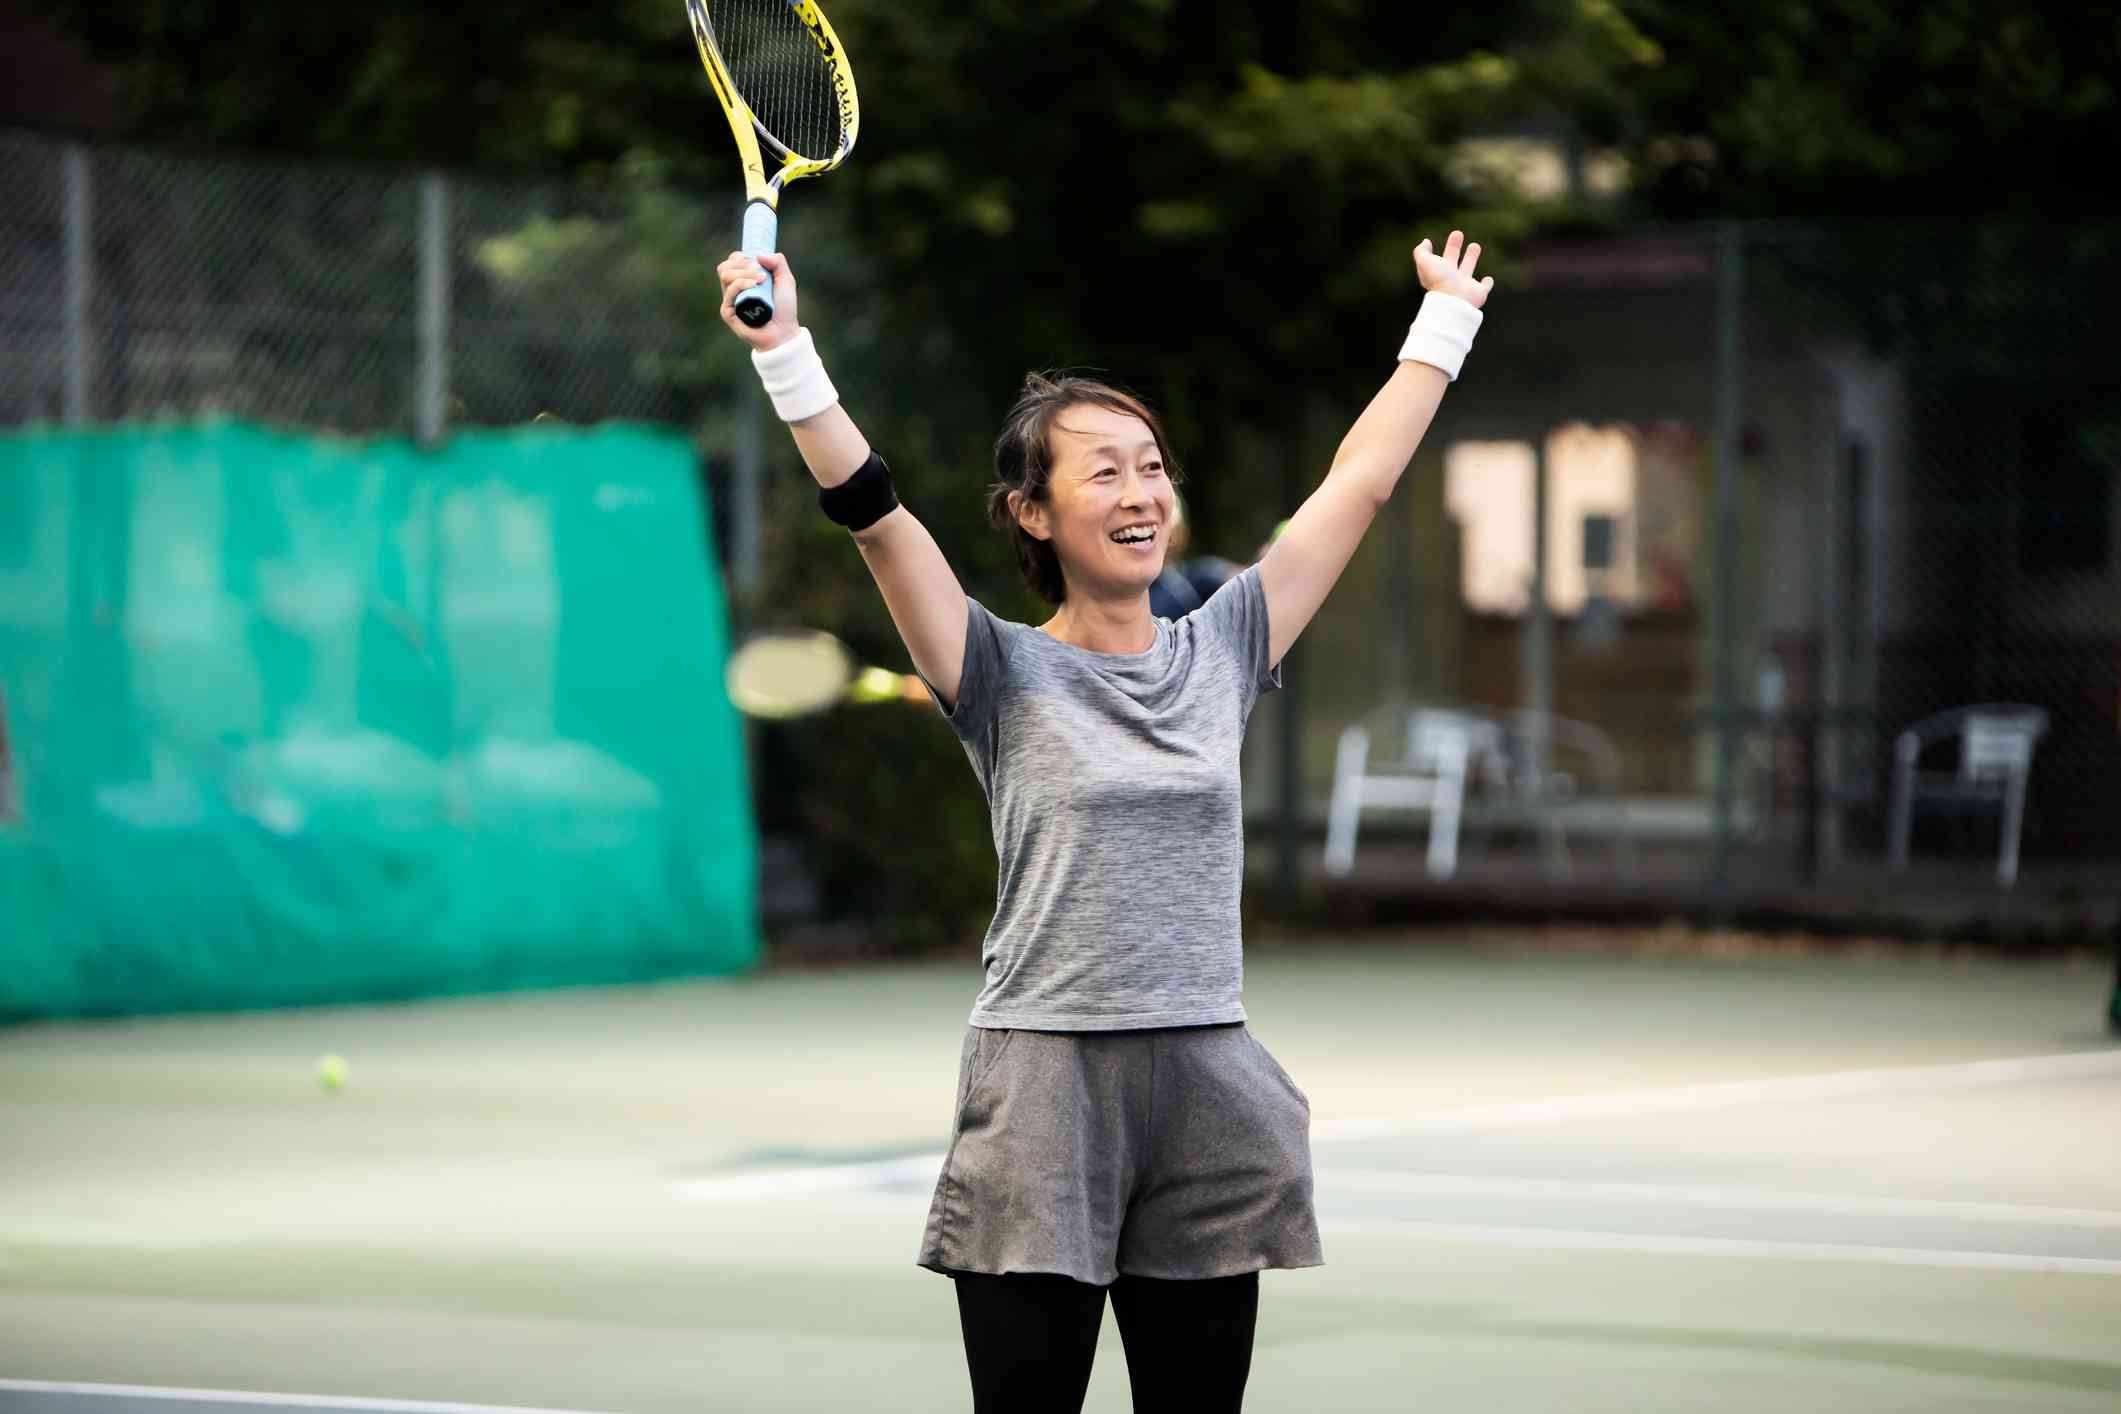 A woman in a grey shirt smiles and raises her arms in victory while holding a tennis racket and standing on a tennis court.